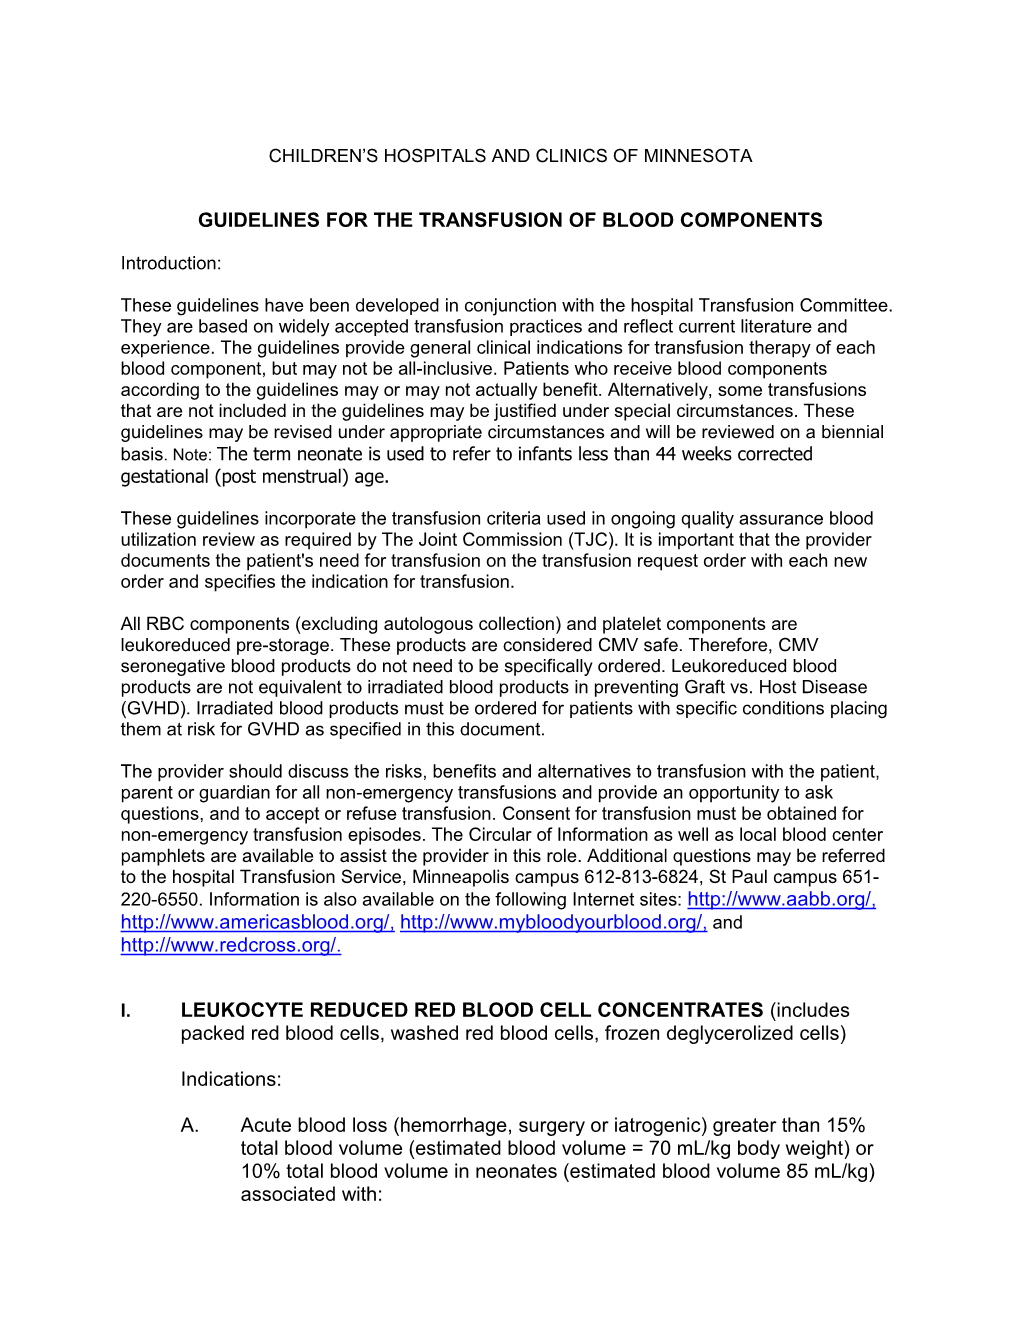 Guidelines for the Transfusion of Blood Components